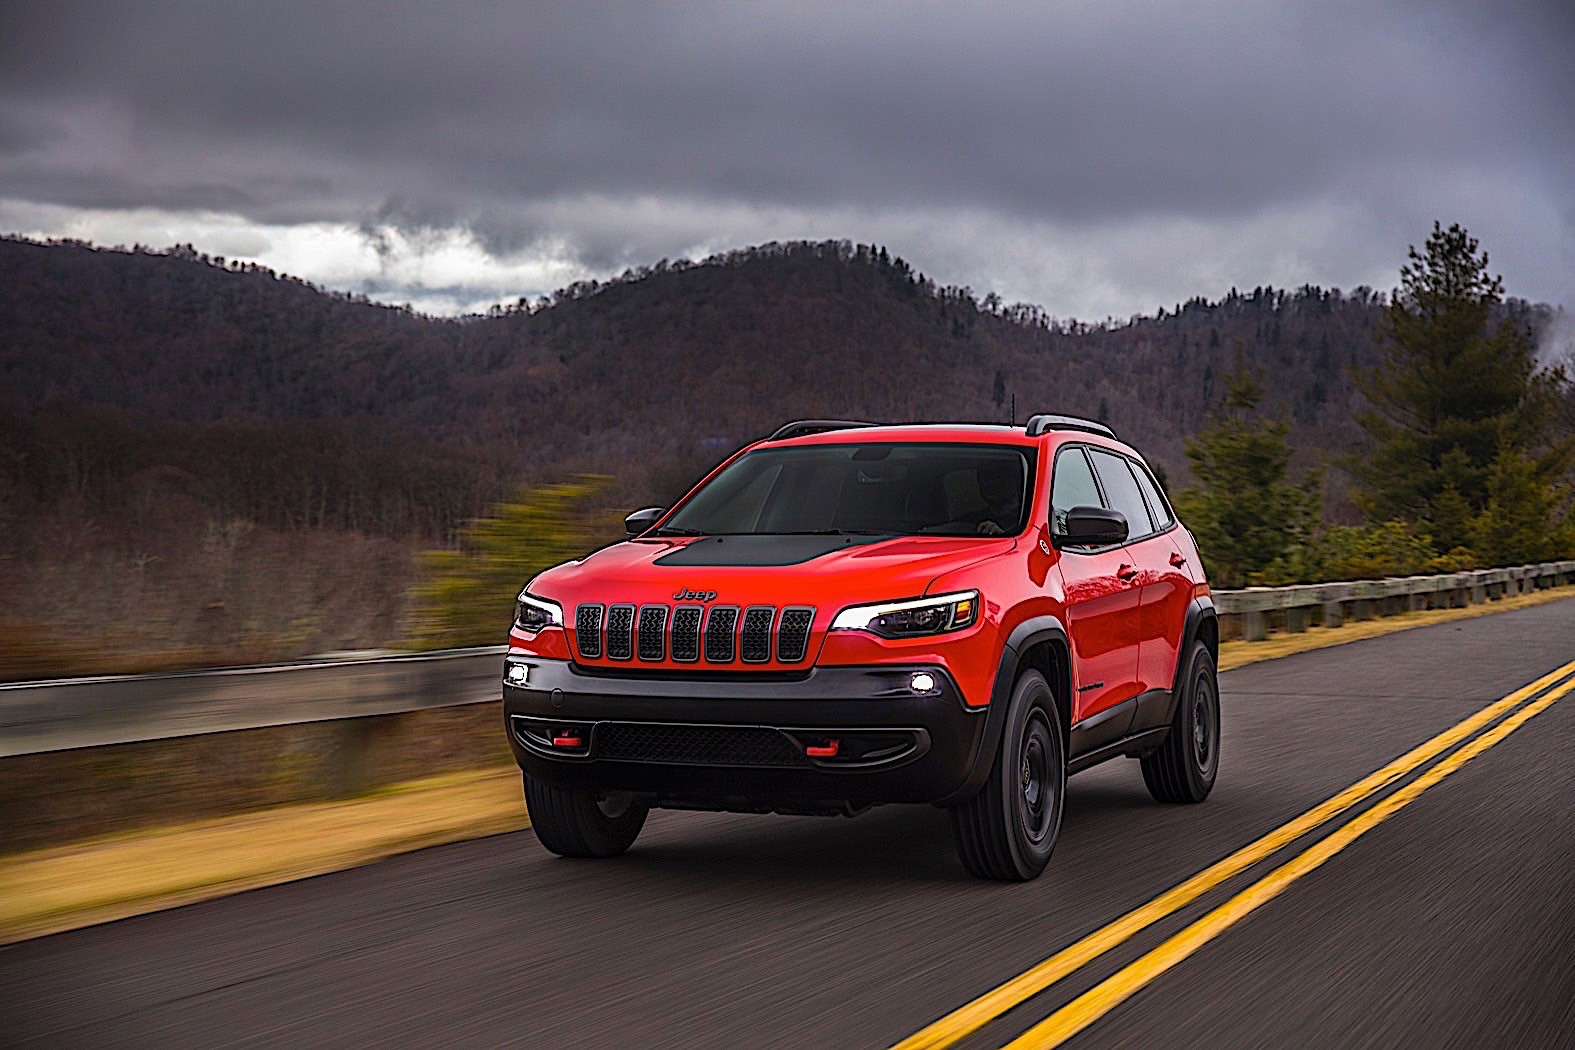 Jeep Super Bowl Ad Focuses On The (Off)Road Beyond The Beaten Path